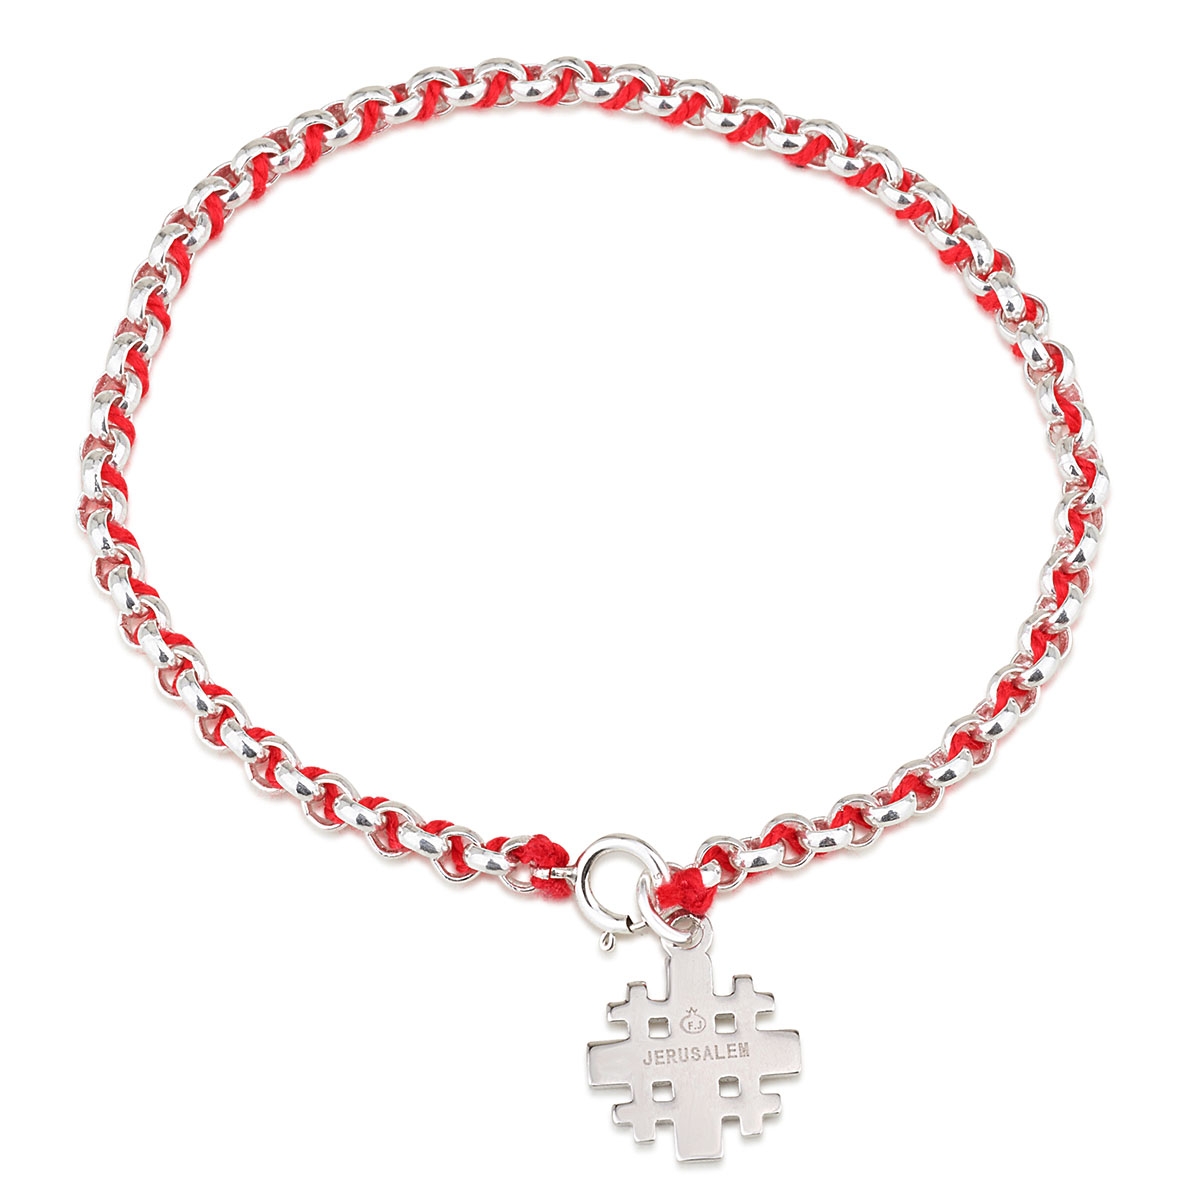 Silver Lockit Beads Bracelet, Silver and Red Polyester Cord